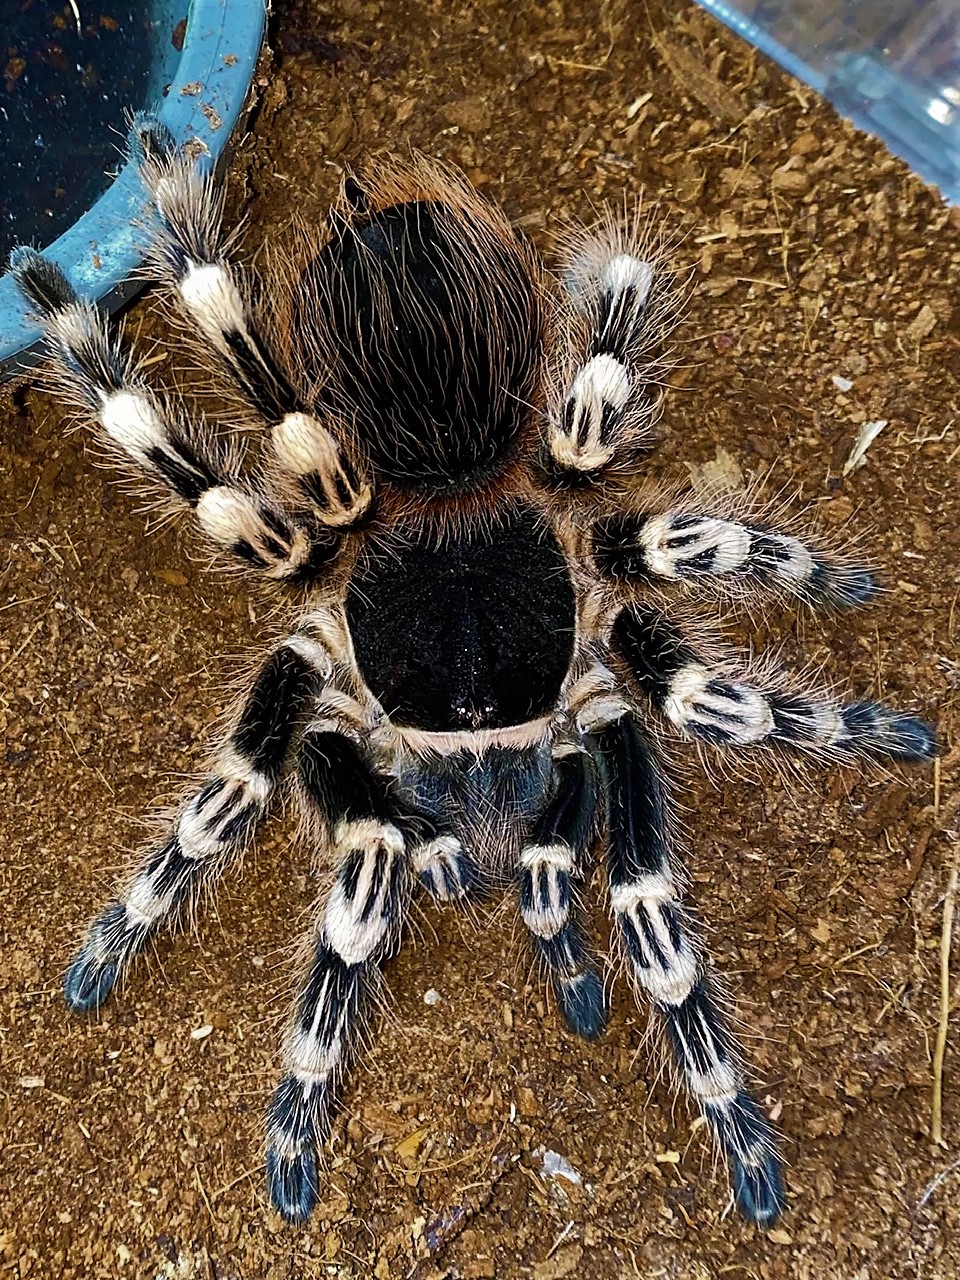 SPECIES SPOTLIGHT: Acanthoscurria geniculata, the Giant White Knee